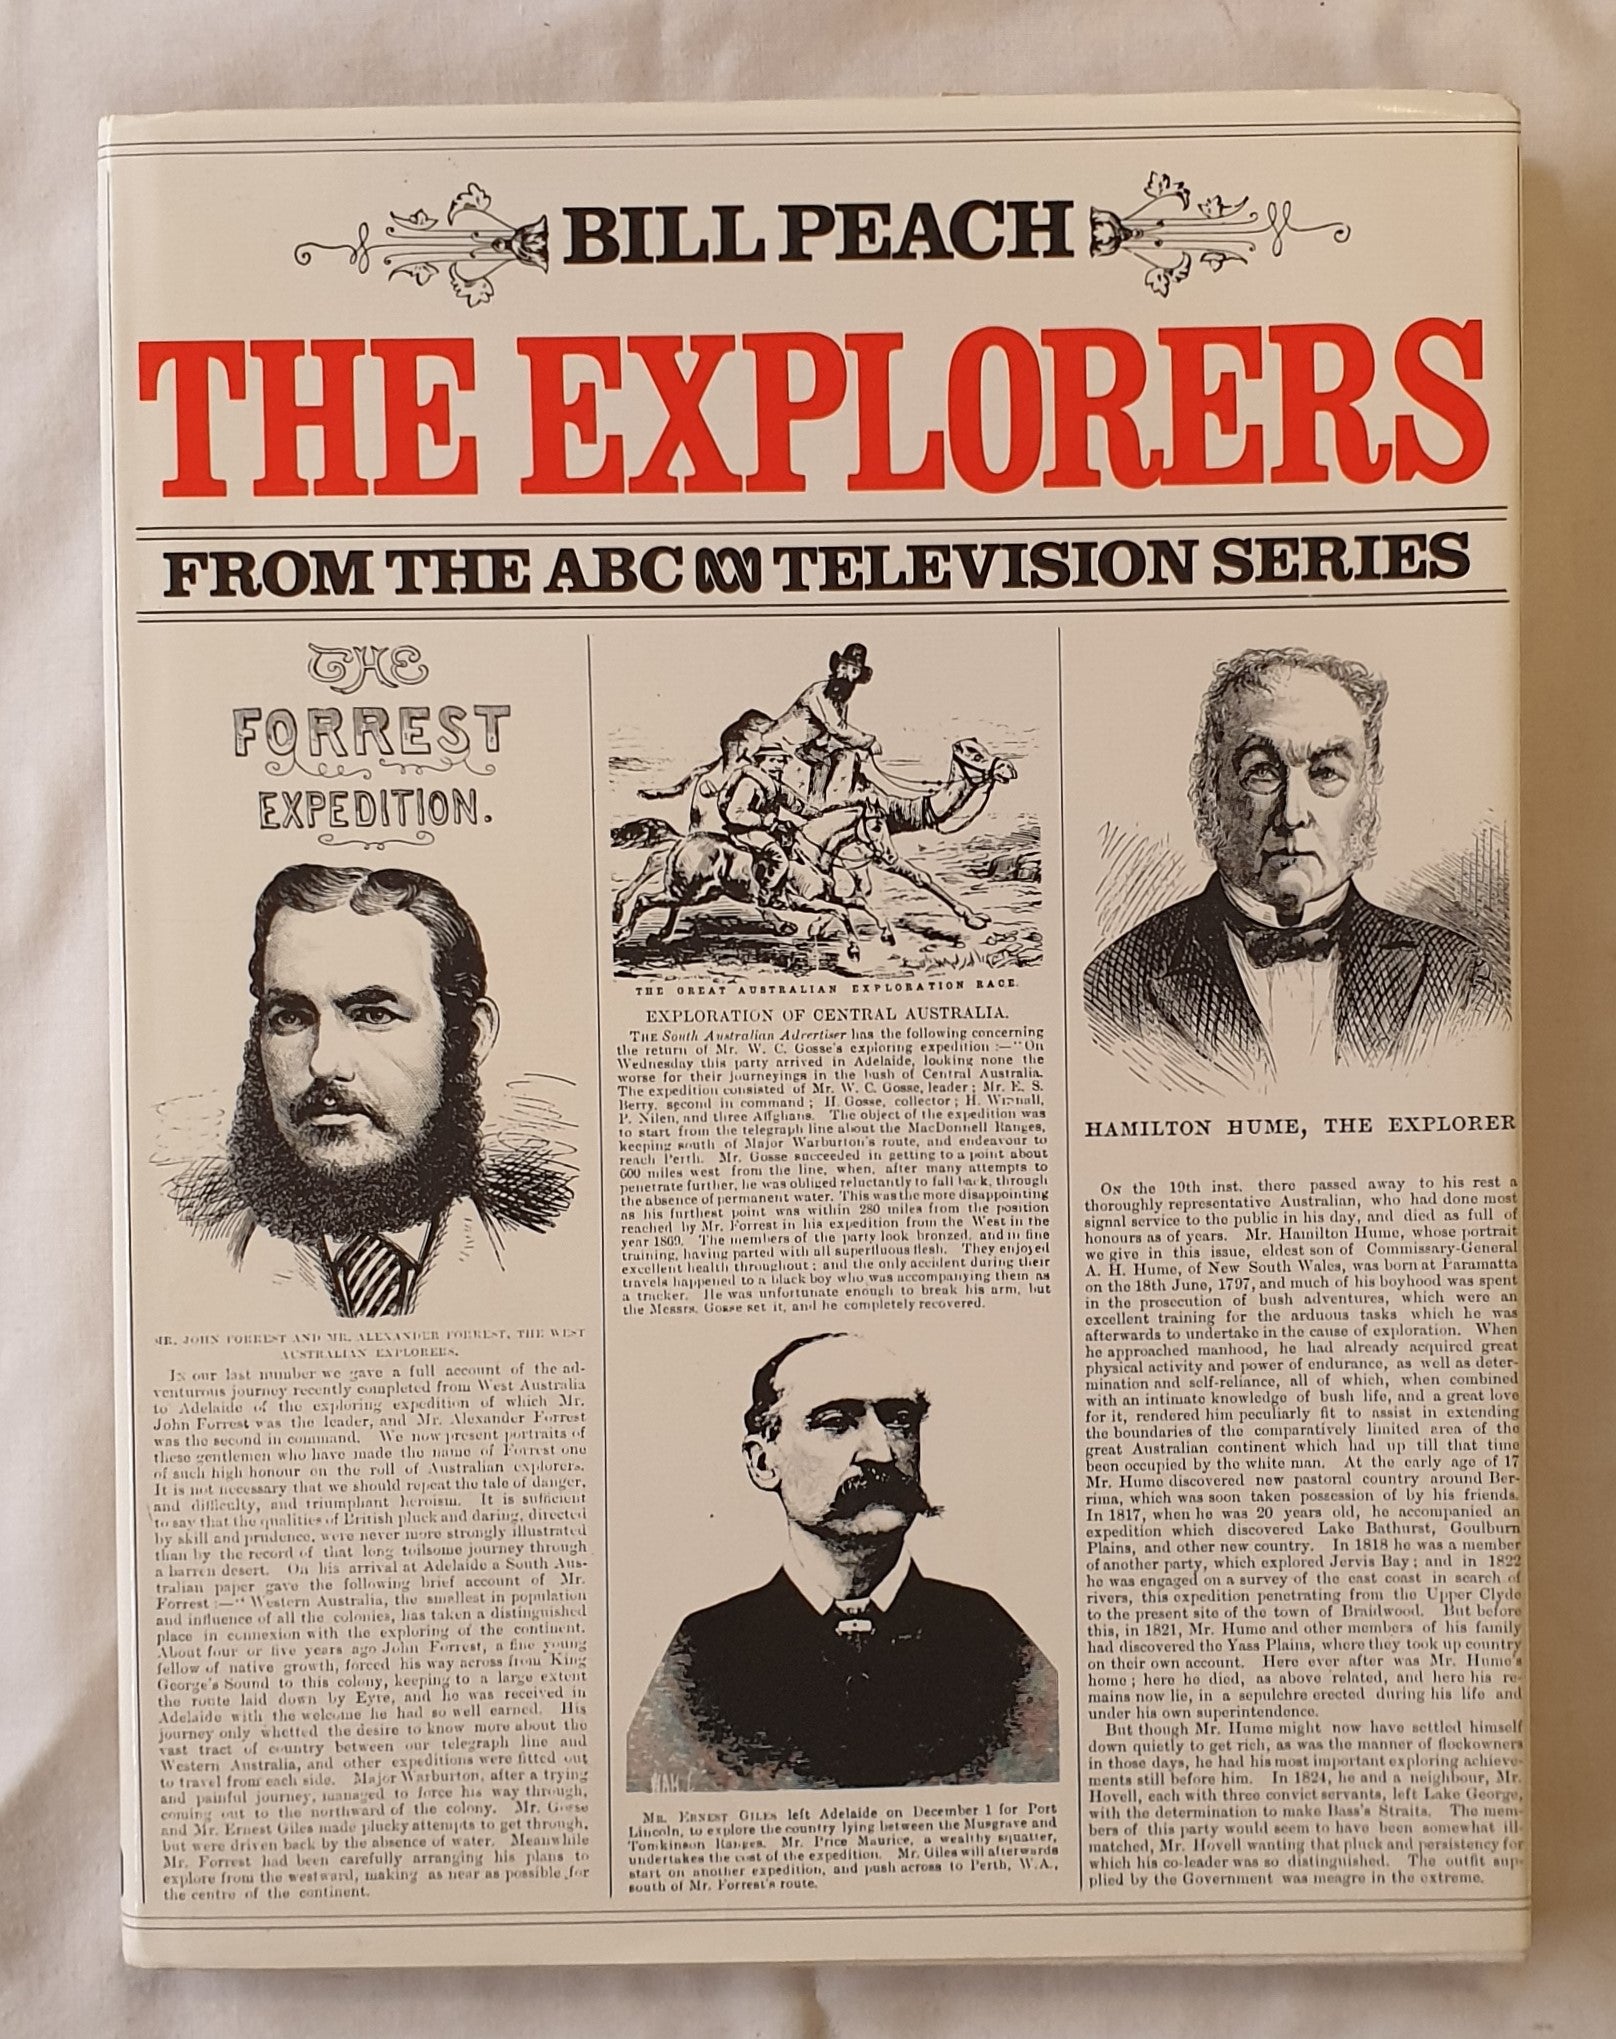 The Explorers  by Bill Peach  From the ABC Television Series